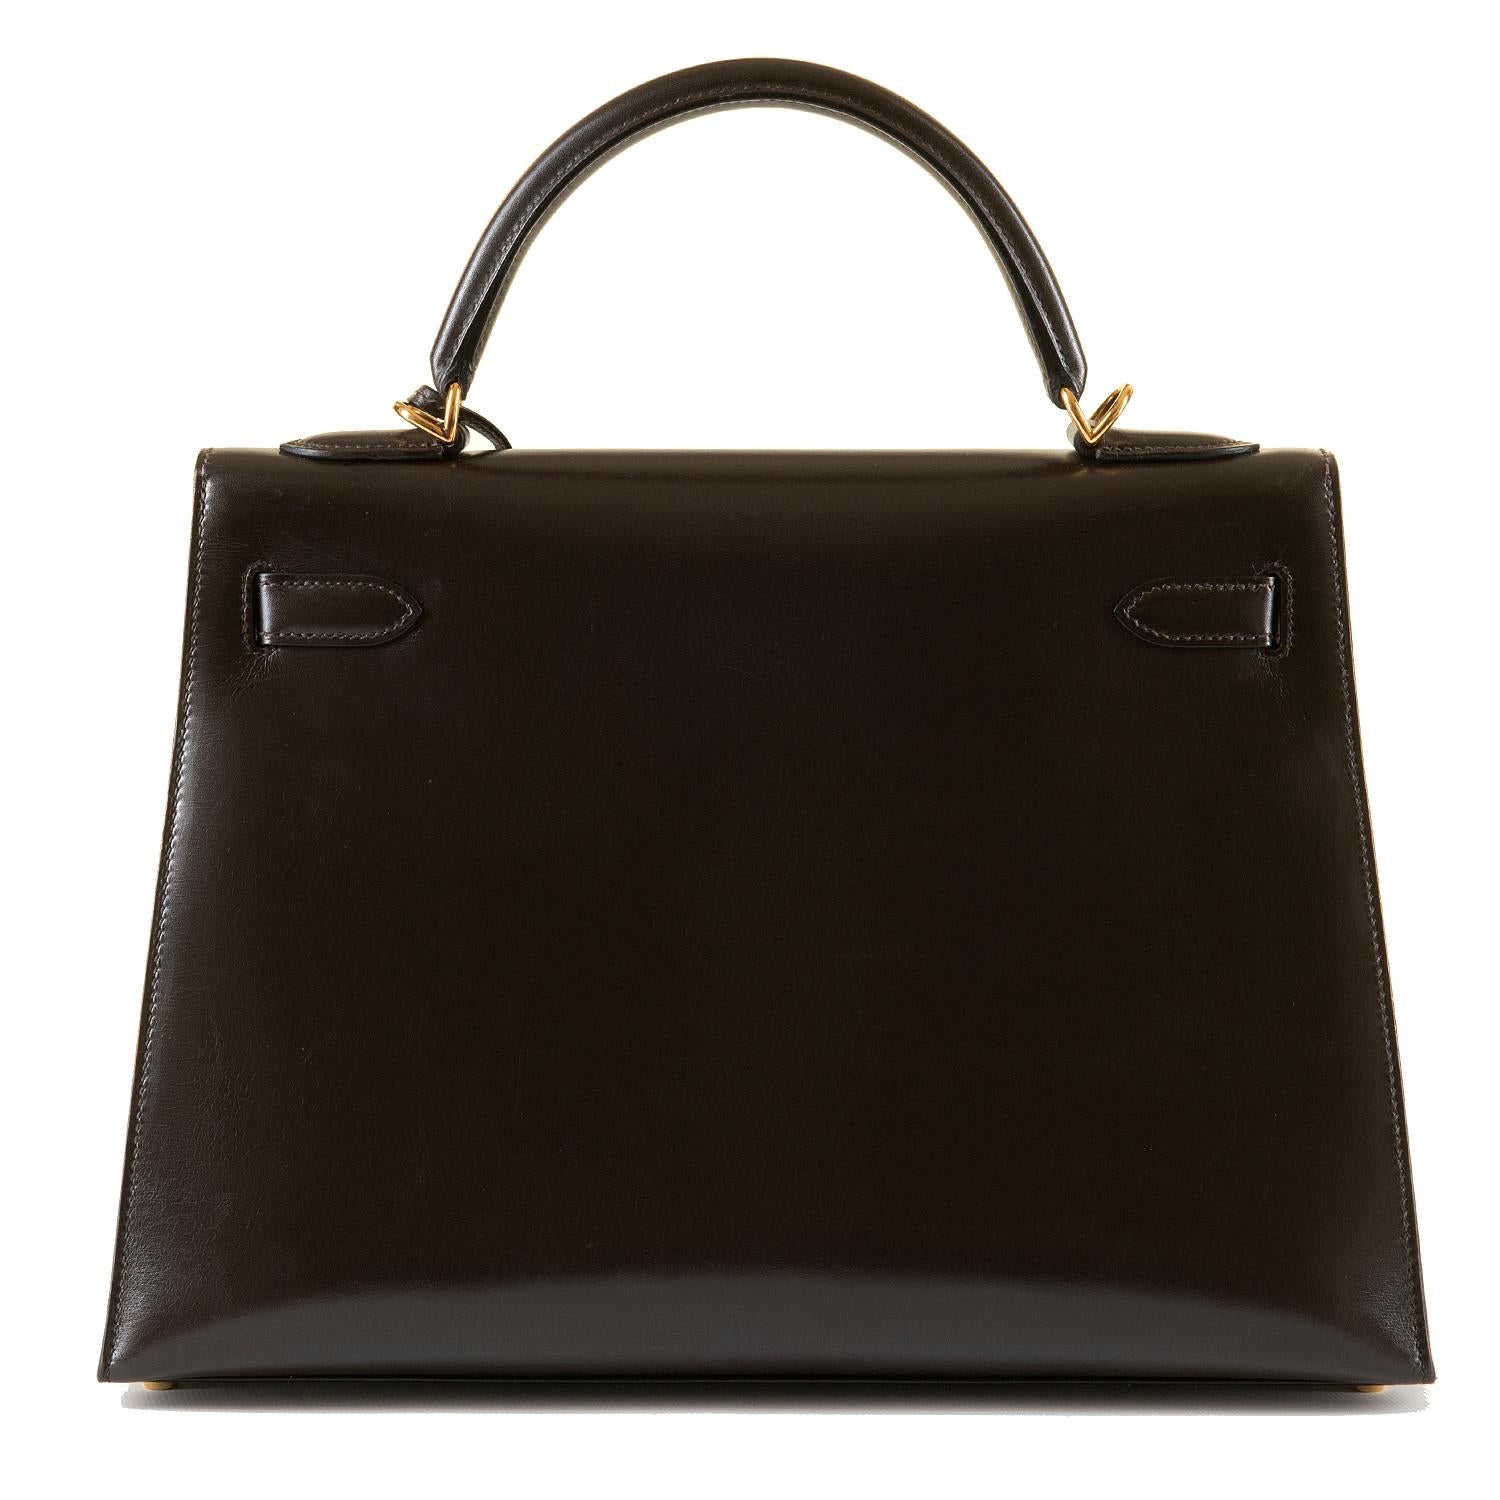 A simply stunning Hermes 32cm Kelly Sellier Bag. In superb condition throughout, the bag is finished in Chocolate Brown Box Calfskin, beautifully accented with gold hardware. From a private collection in Paris, the bag has been very lightly used,